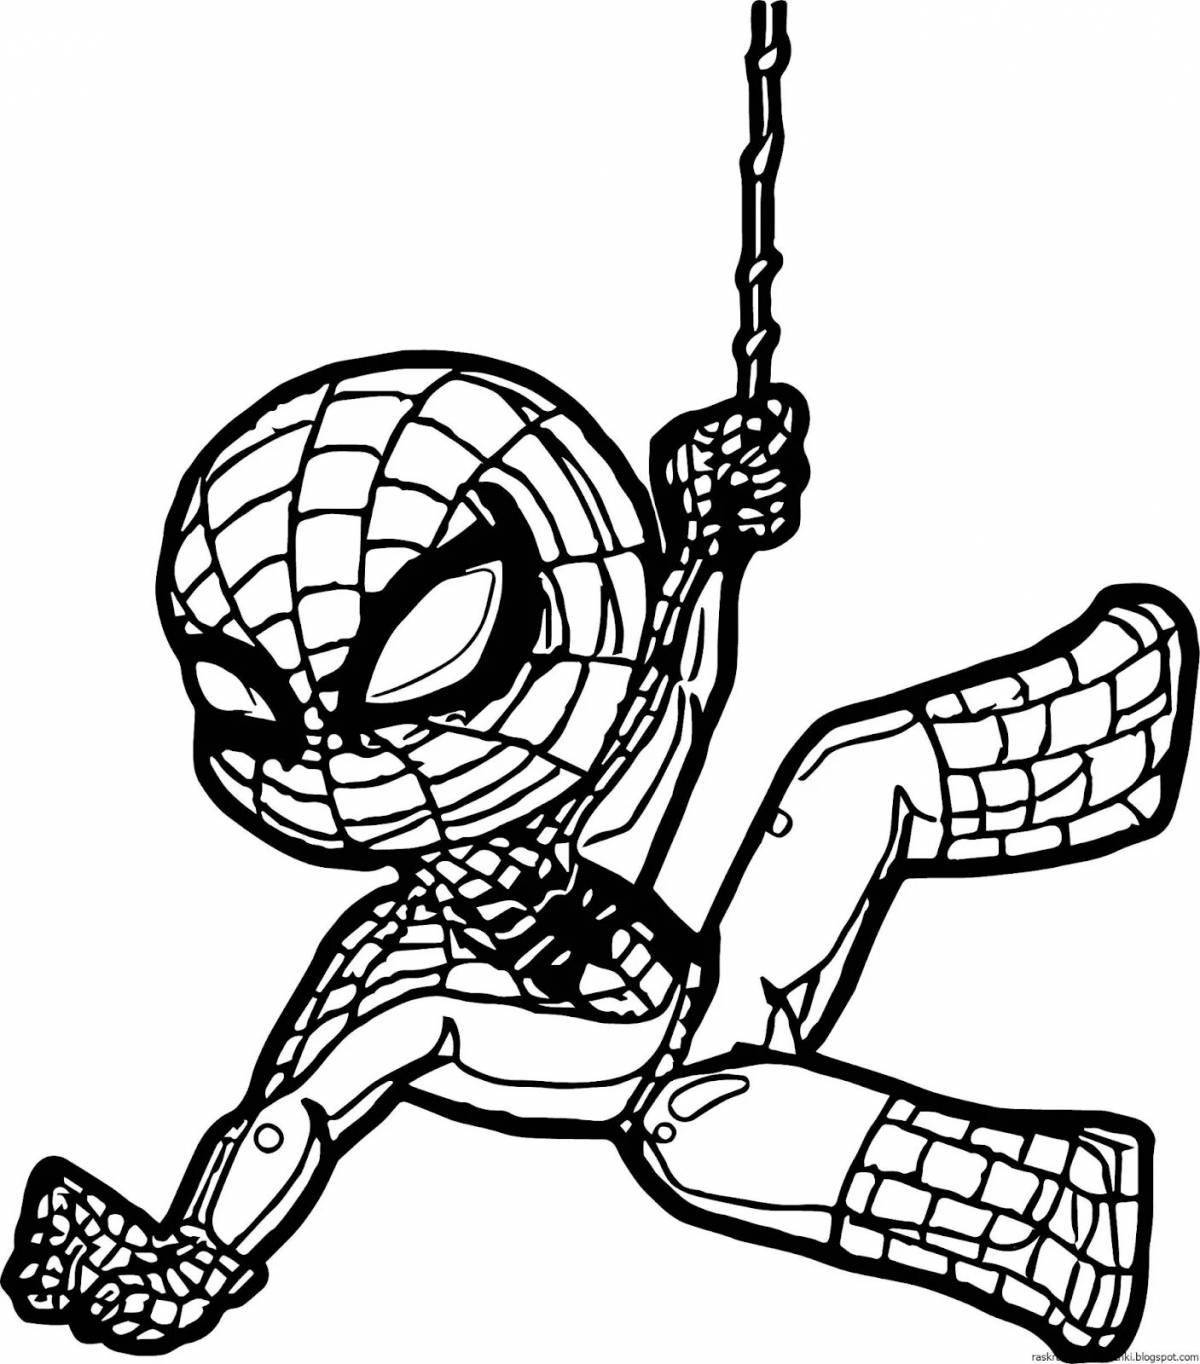 Playful spiderman turn on coloring